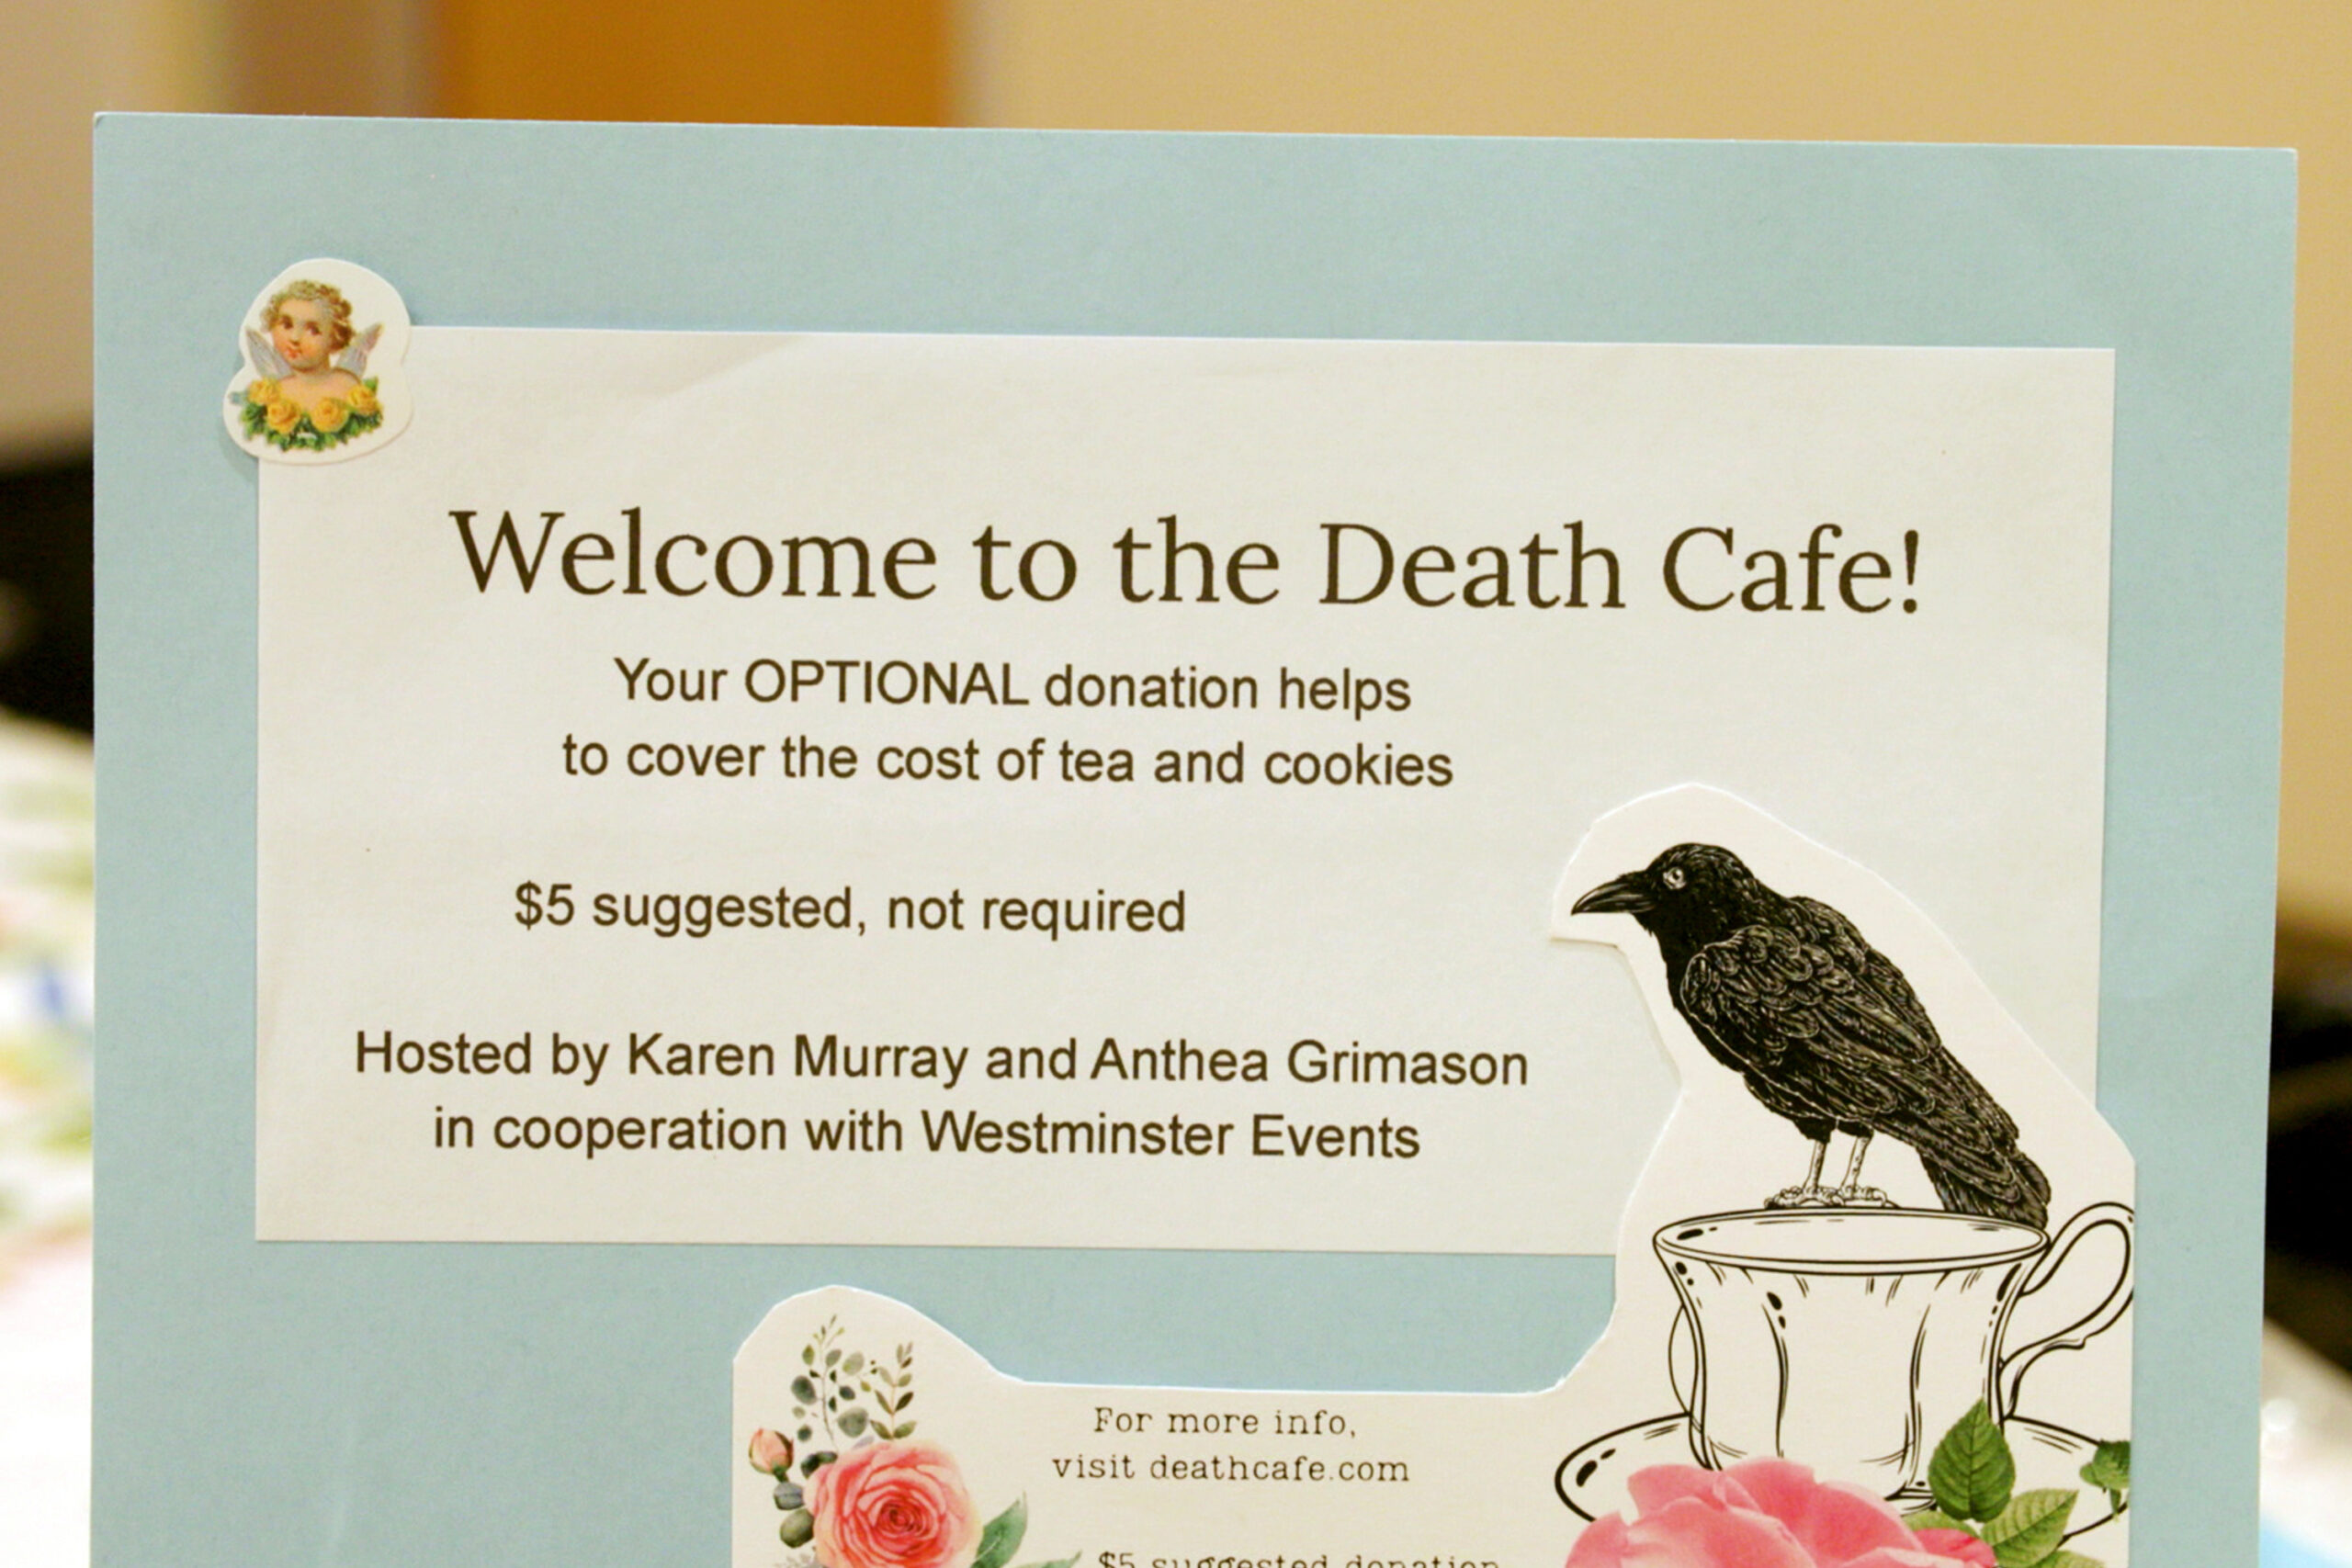 Everyone Dies. This Bay Area ‘Death Cafe’ Hopes To Normalize Life’s Most Taboo Topic